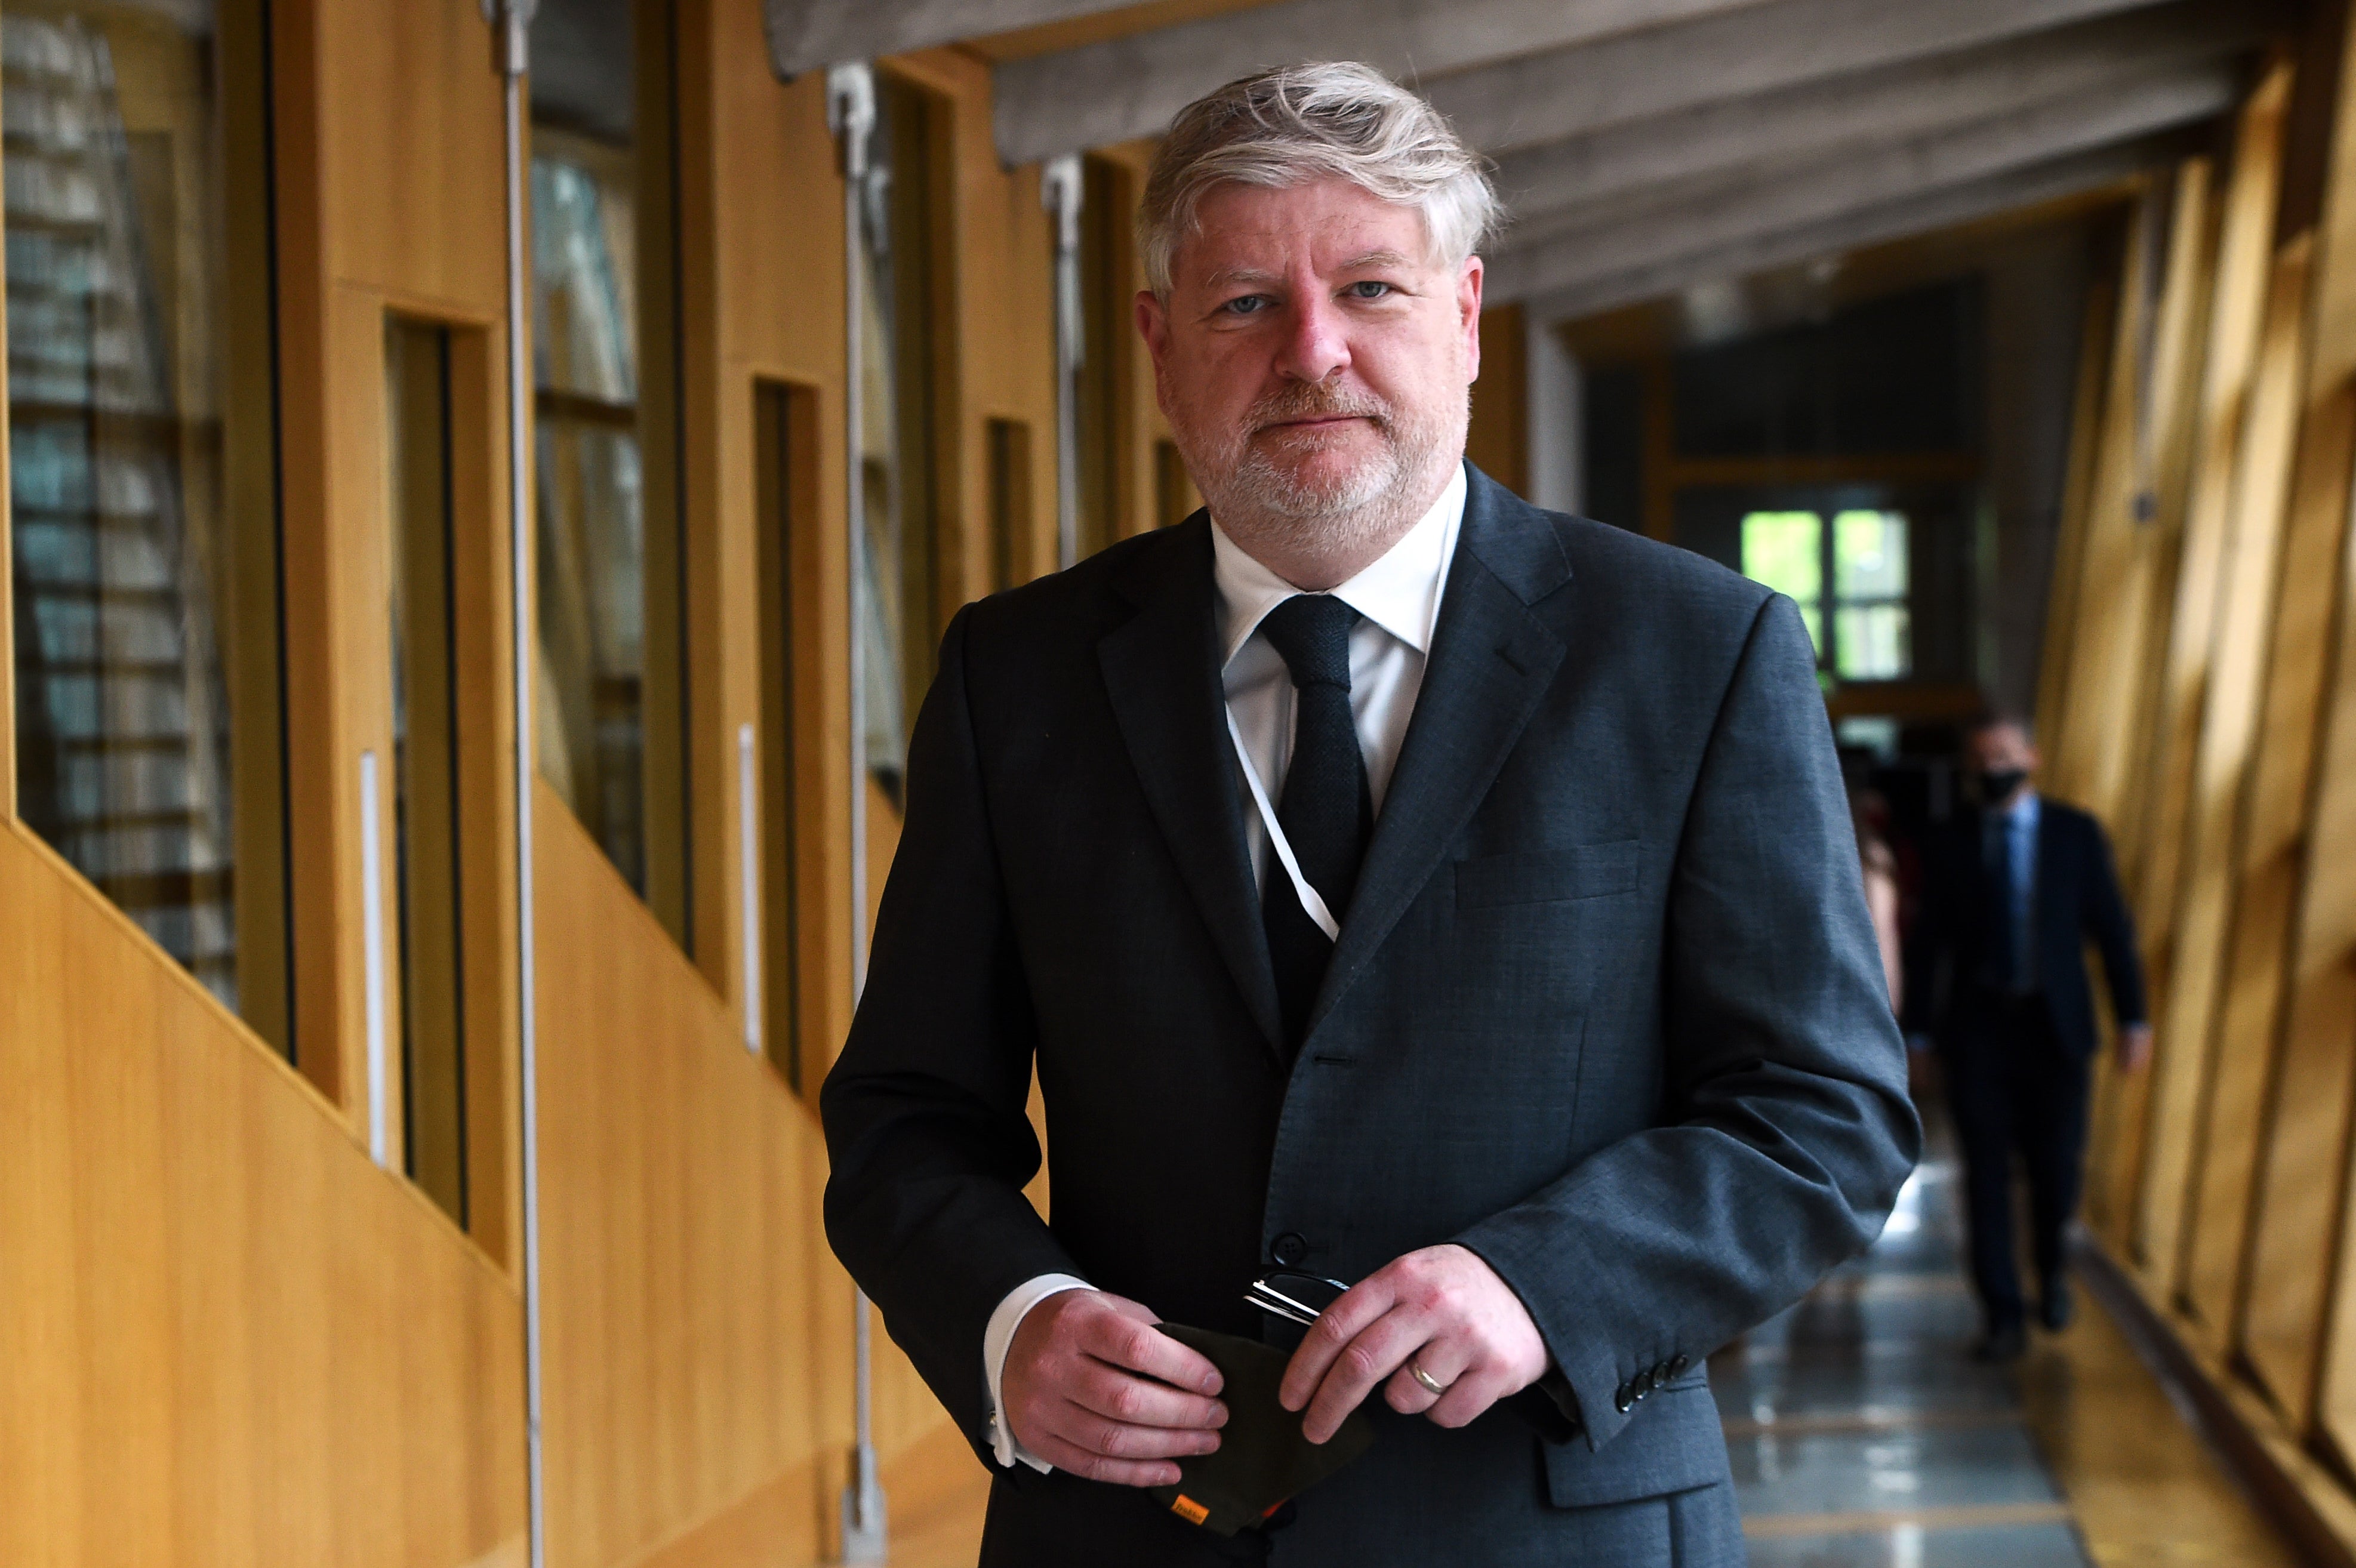 Angus Robertson said the best future for Scotland was independence (Andy Buchanan/PA)